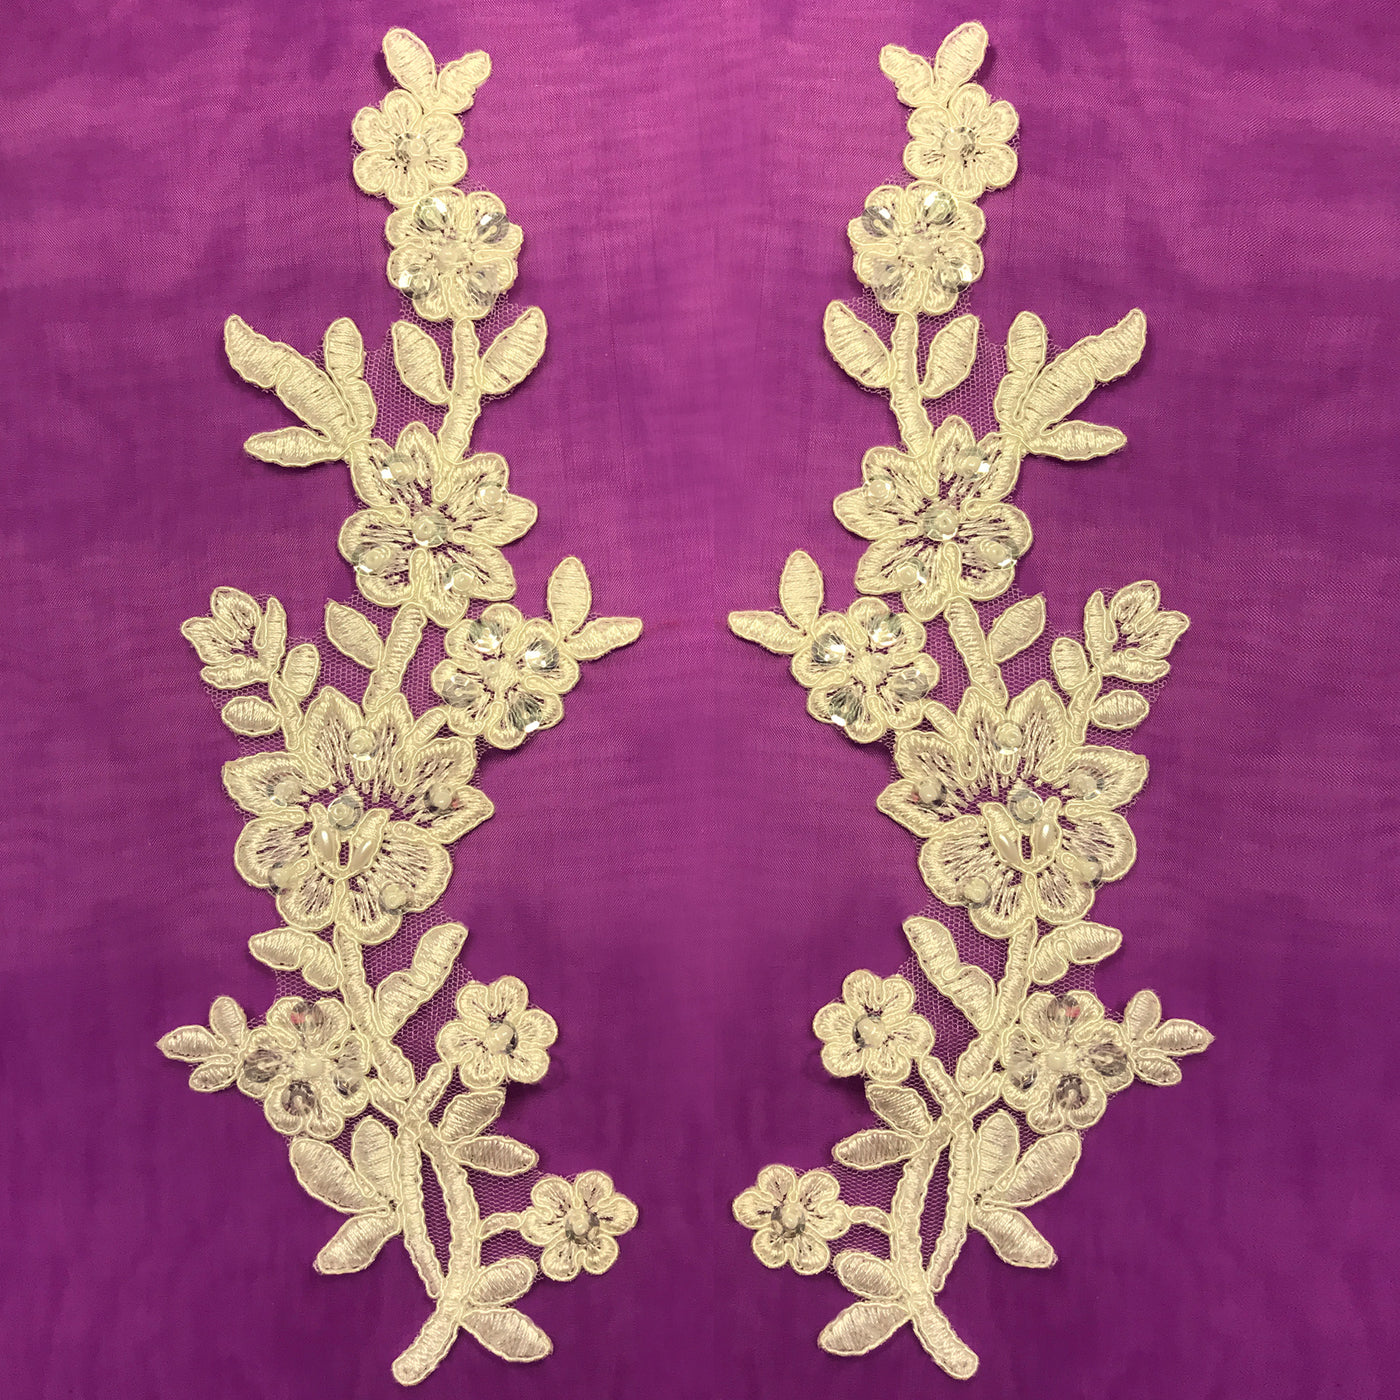 Beaded & Corded Floral Appliqué Lace Embroidered on 100% Polyester Organza or Net Mesh